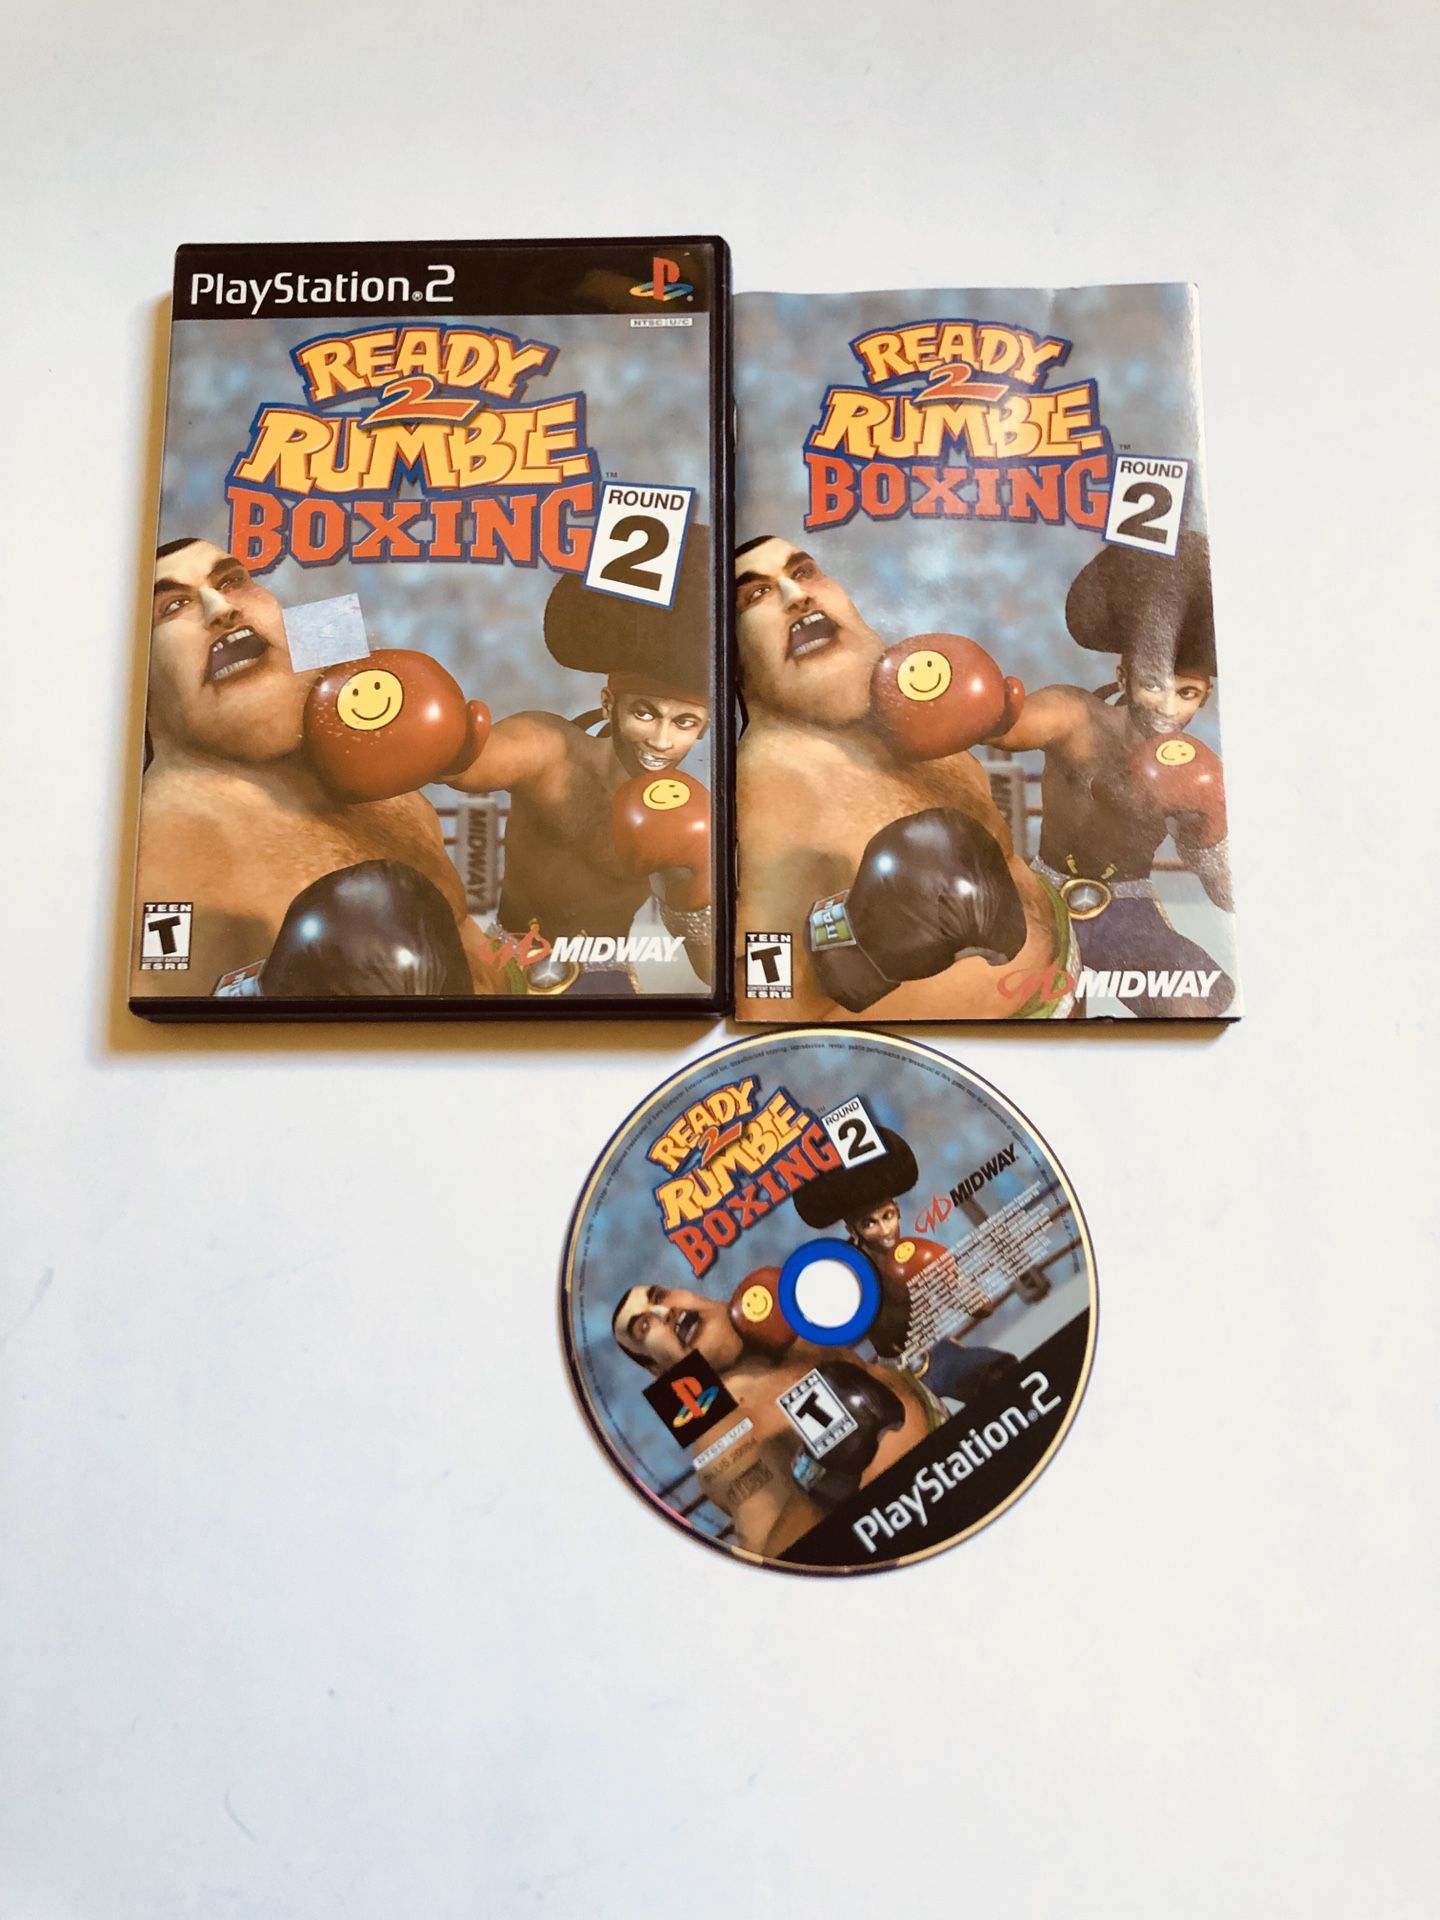 Ready 2 rumble boxing round 2 PlayStation 2 Ps2